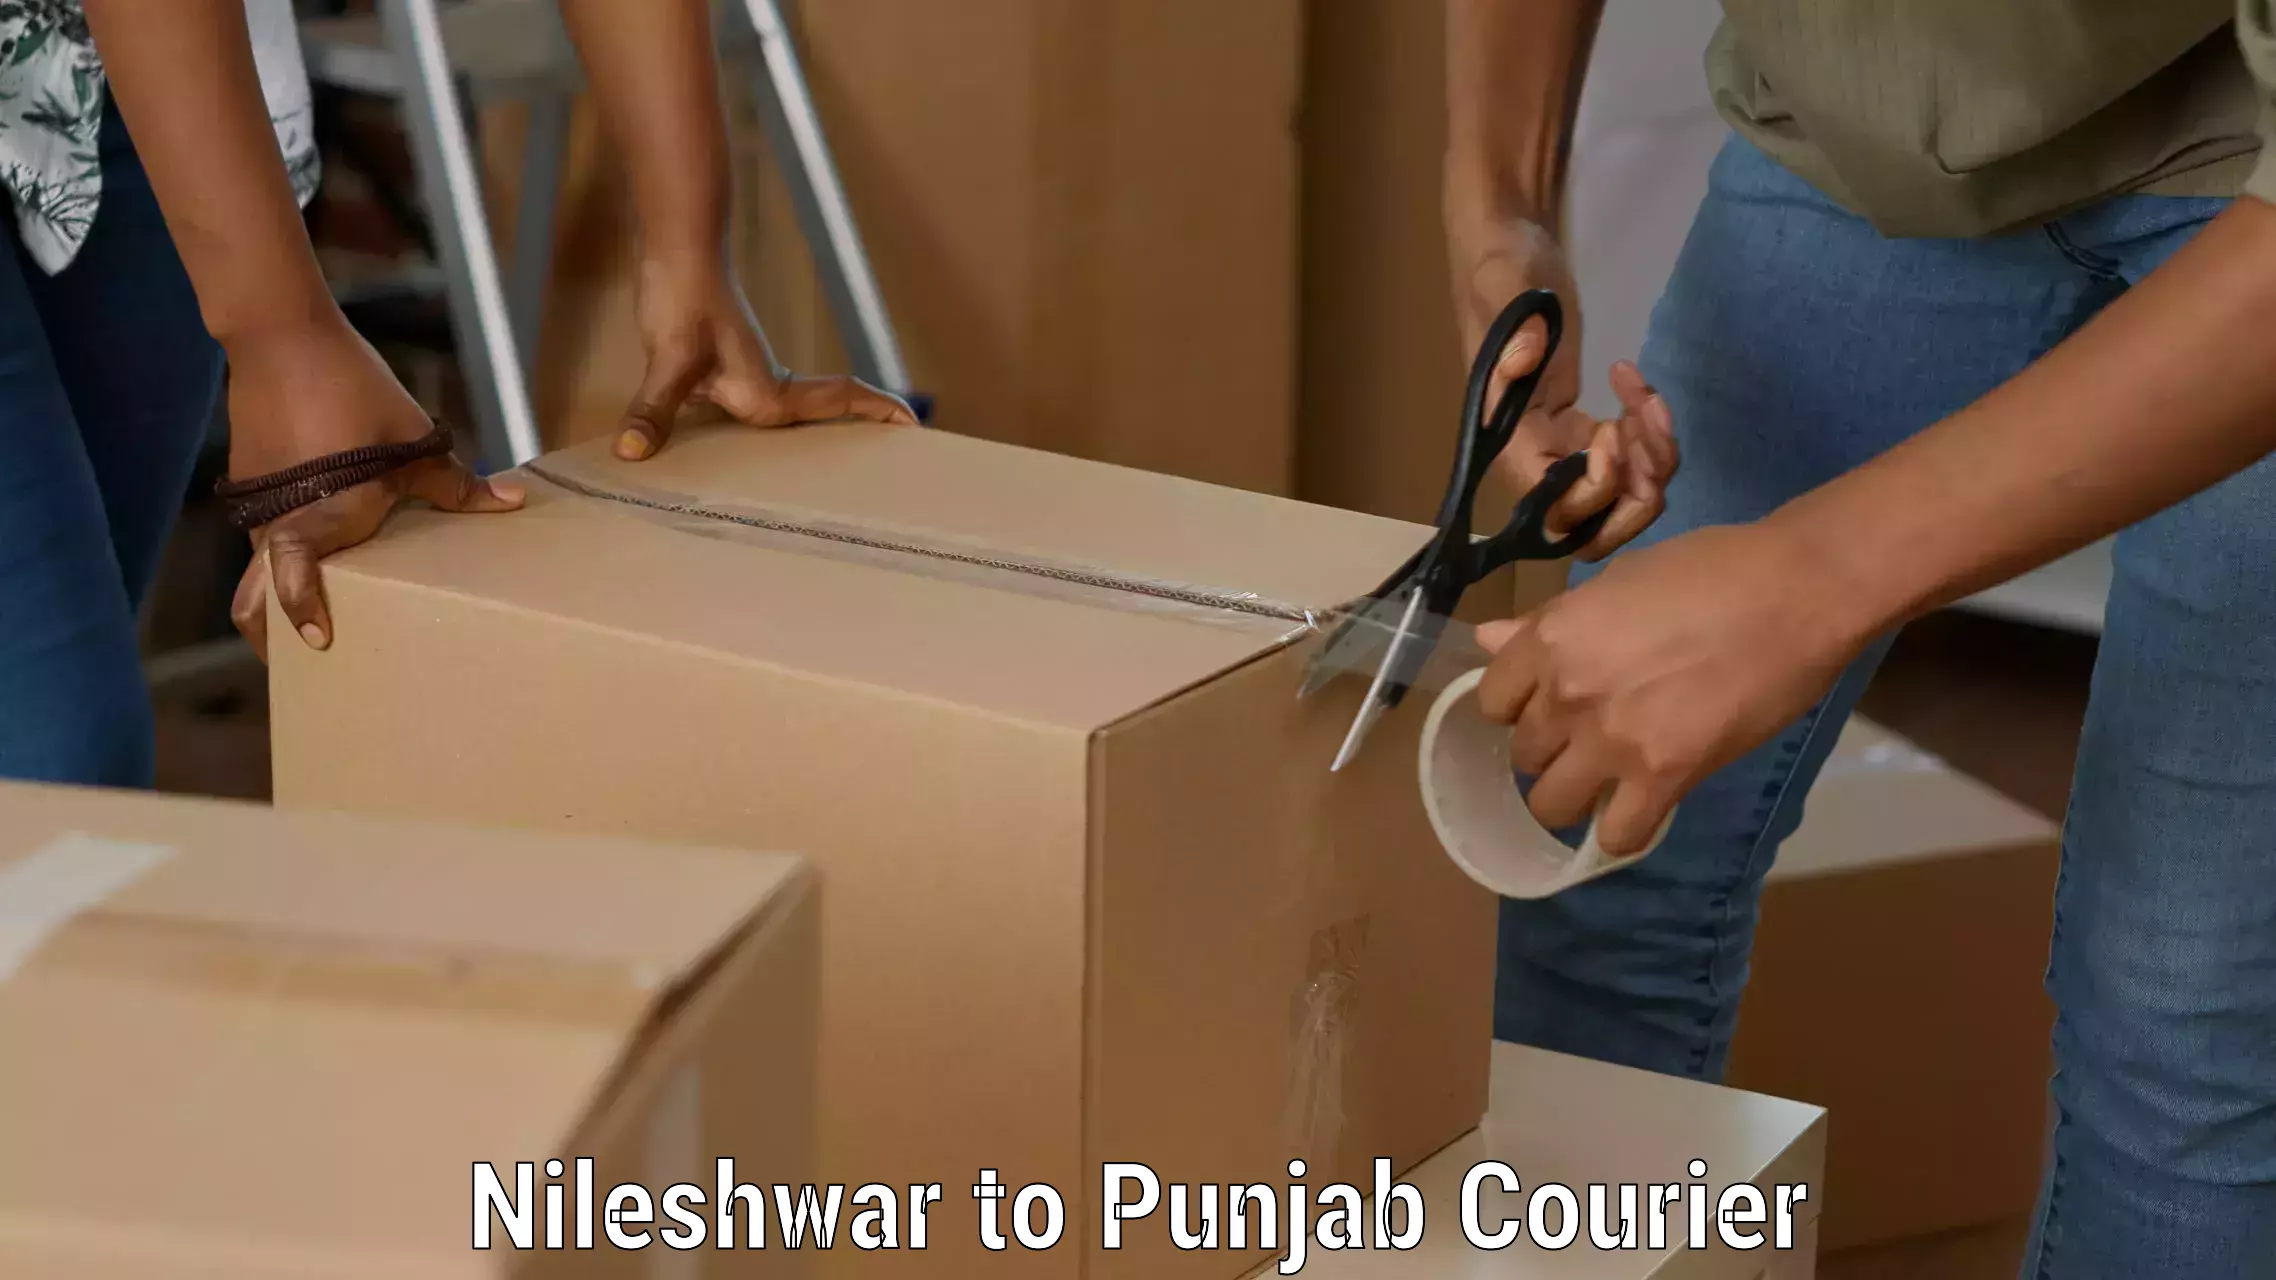 Corporate courier solutions Nileshwar to Punjab